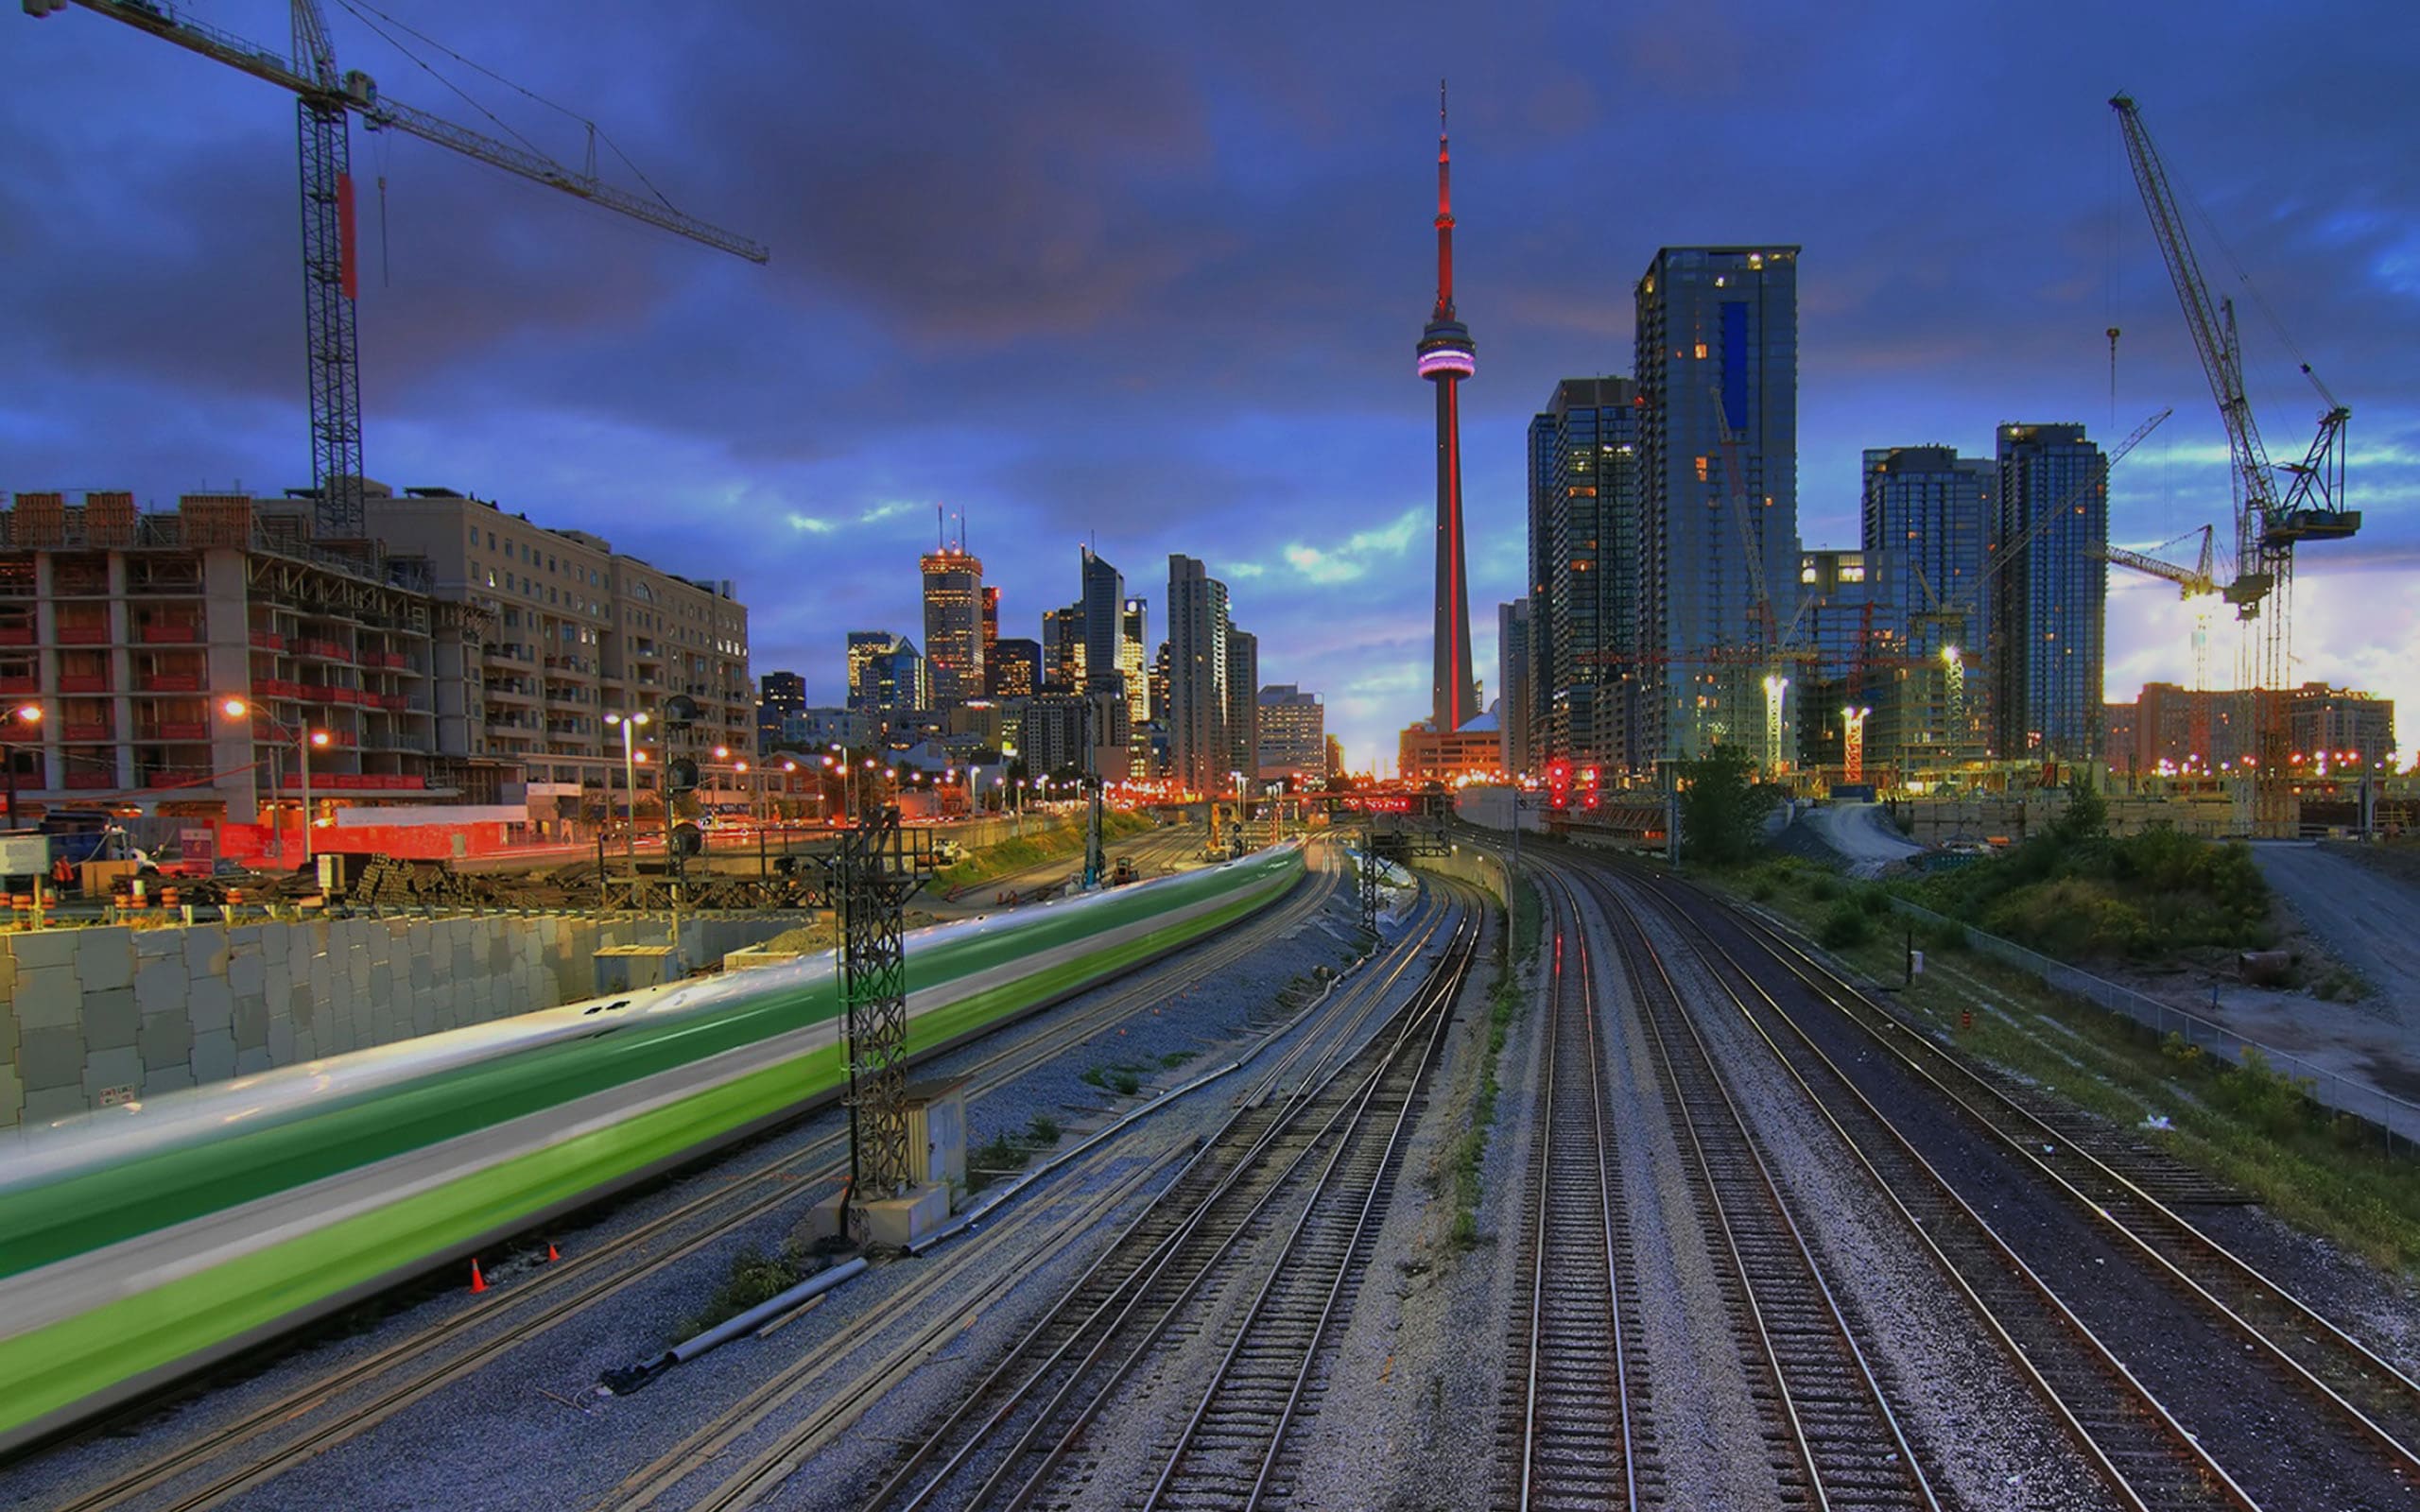 Metrolinx Go Train Downtown Toronto with CN Tower in the background light streaks